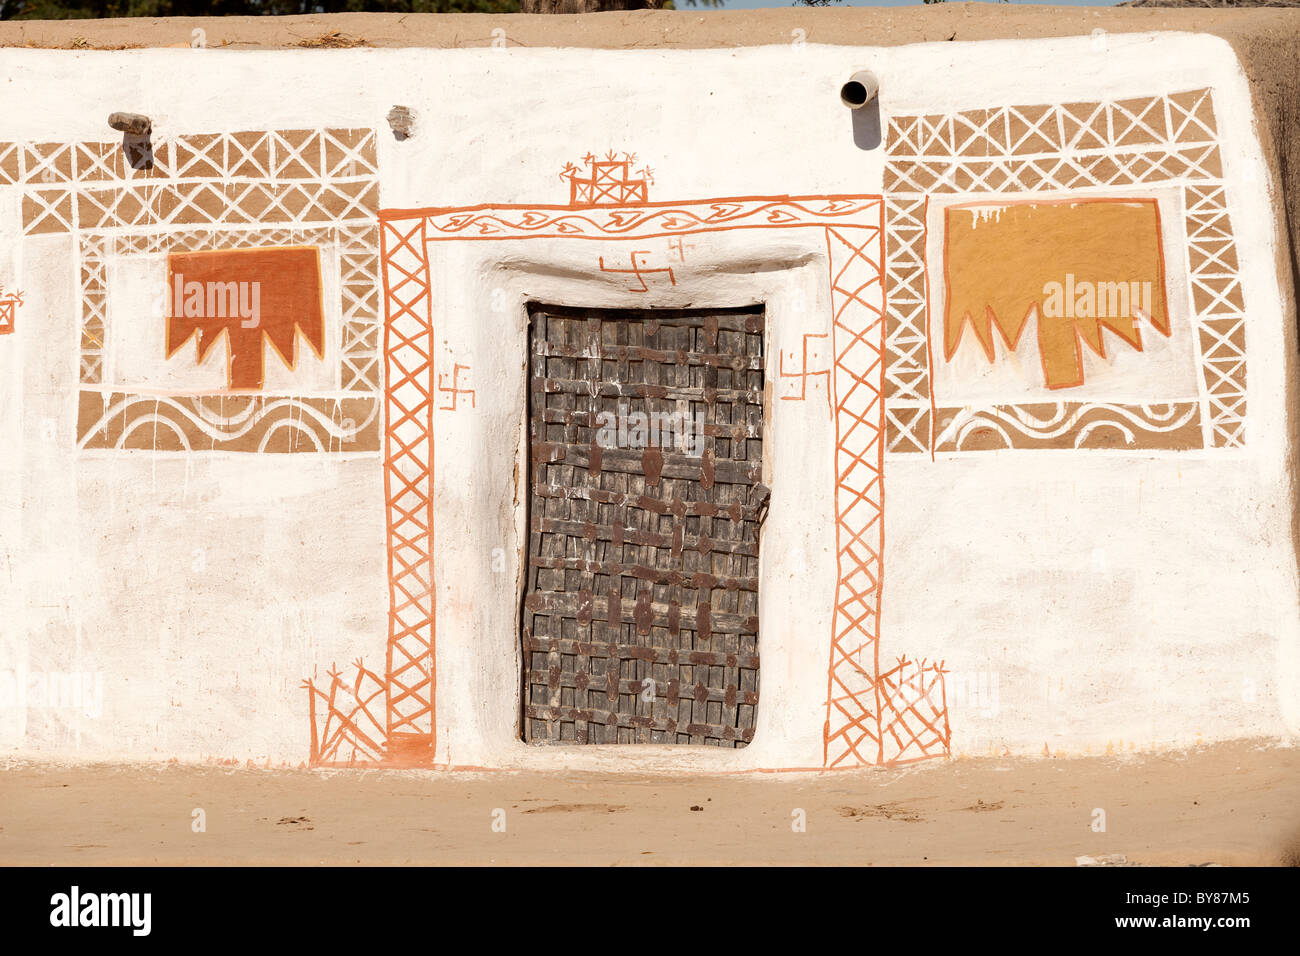 India, Rajasthan, Thar Desert, traditional village home painted walls Stock Photo